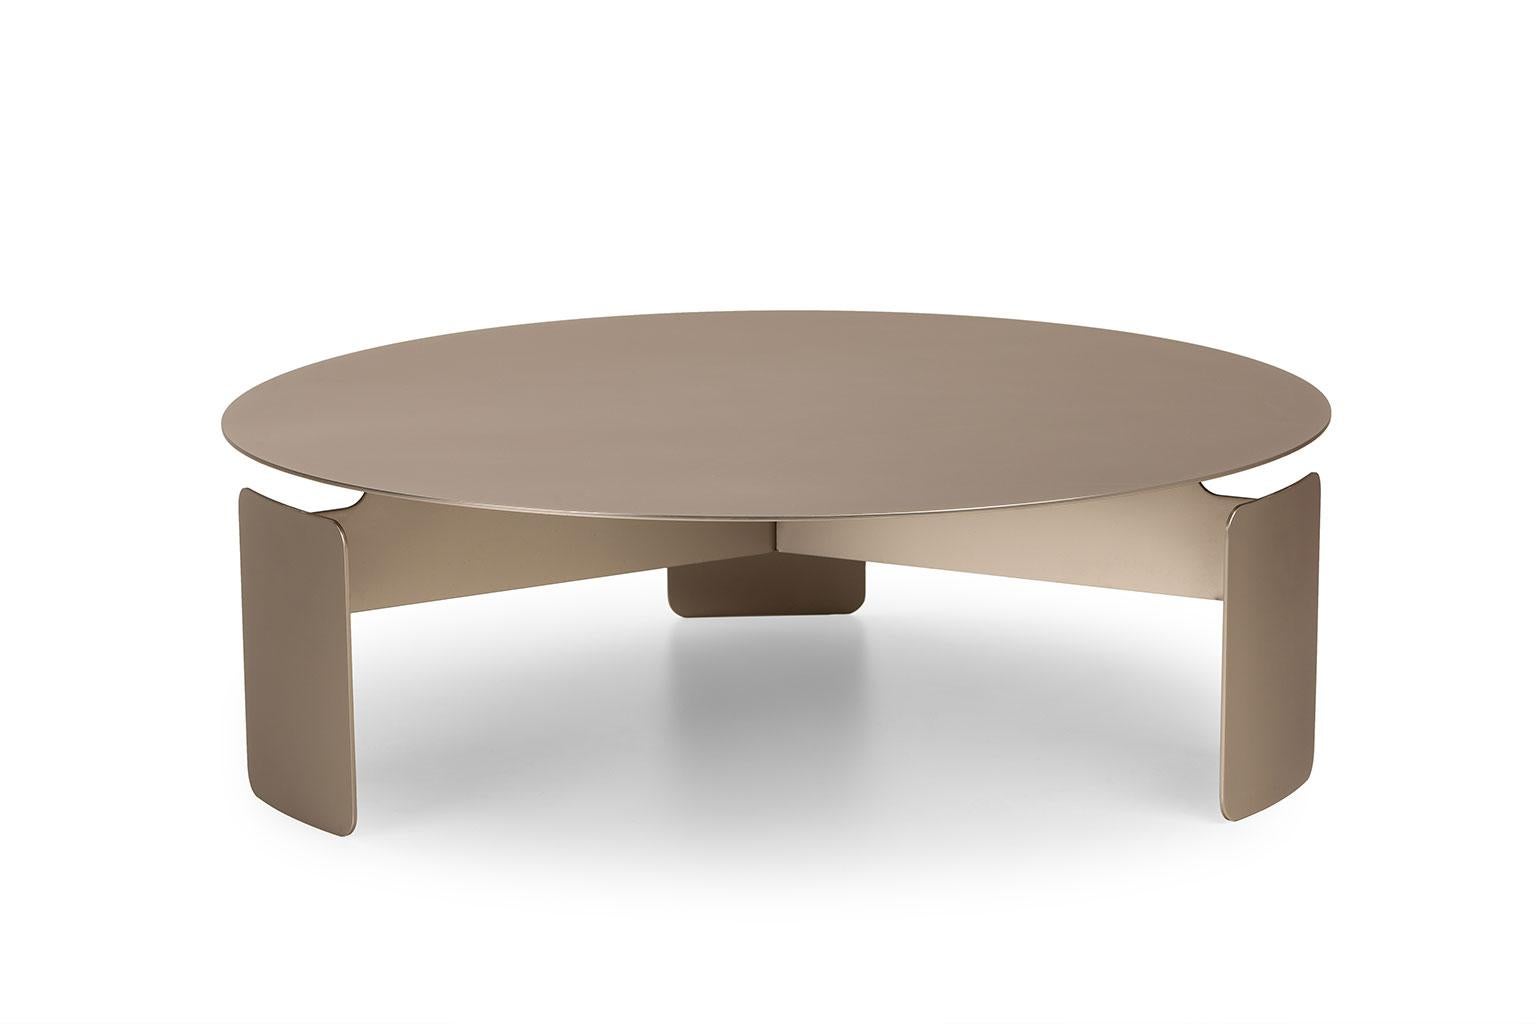 Shirudo Coffee Table by Elisa Honkanen for Mingardo In New Condition For Sale In Brooklyn, NY